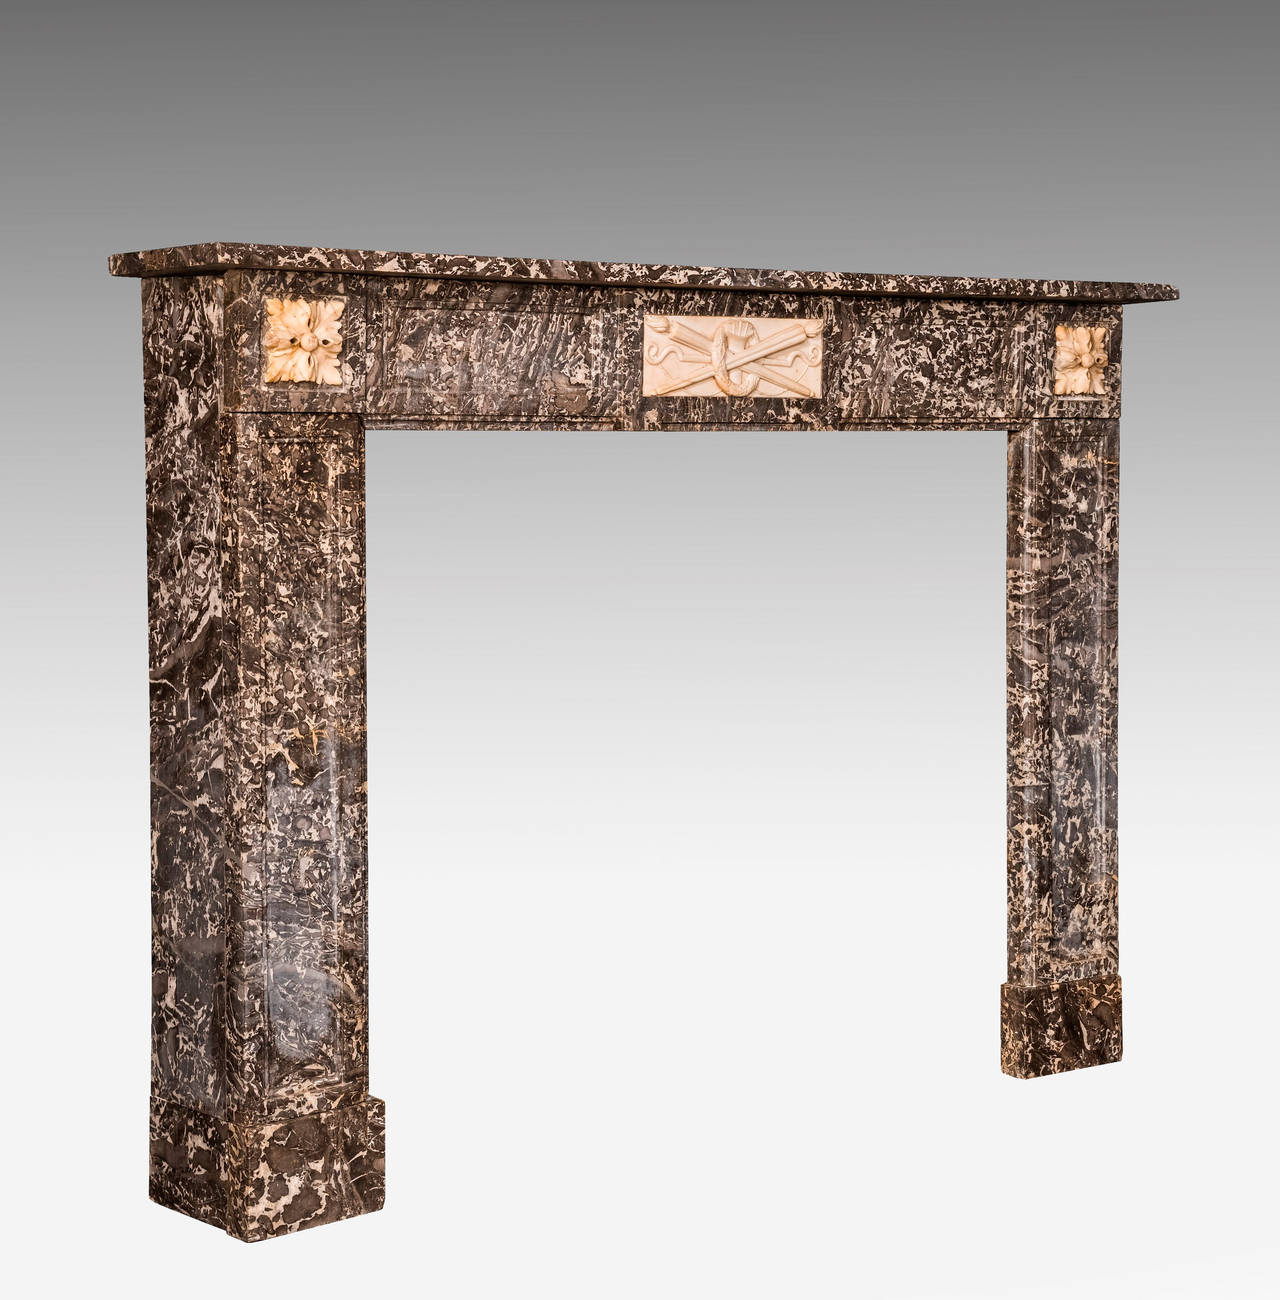 A very attractive Northern European highly figured grey marble fireplace, with white statue panels. Minor and old restorations to the uprights.

Shelf Length - 61.00 Inches 
Shelf Depth - 10.00 Inches 
Opening Height - 36.50 Inches 
Opening Width -